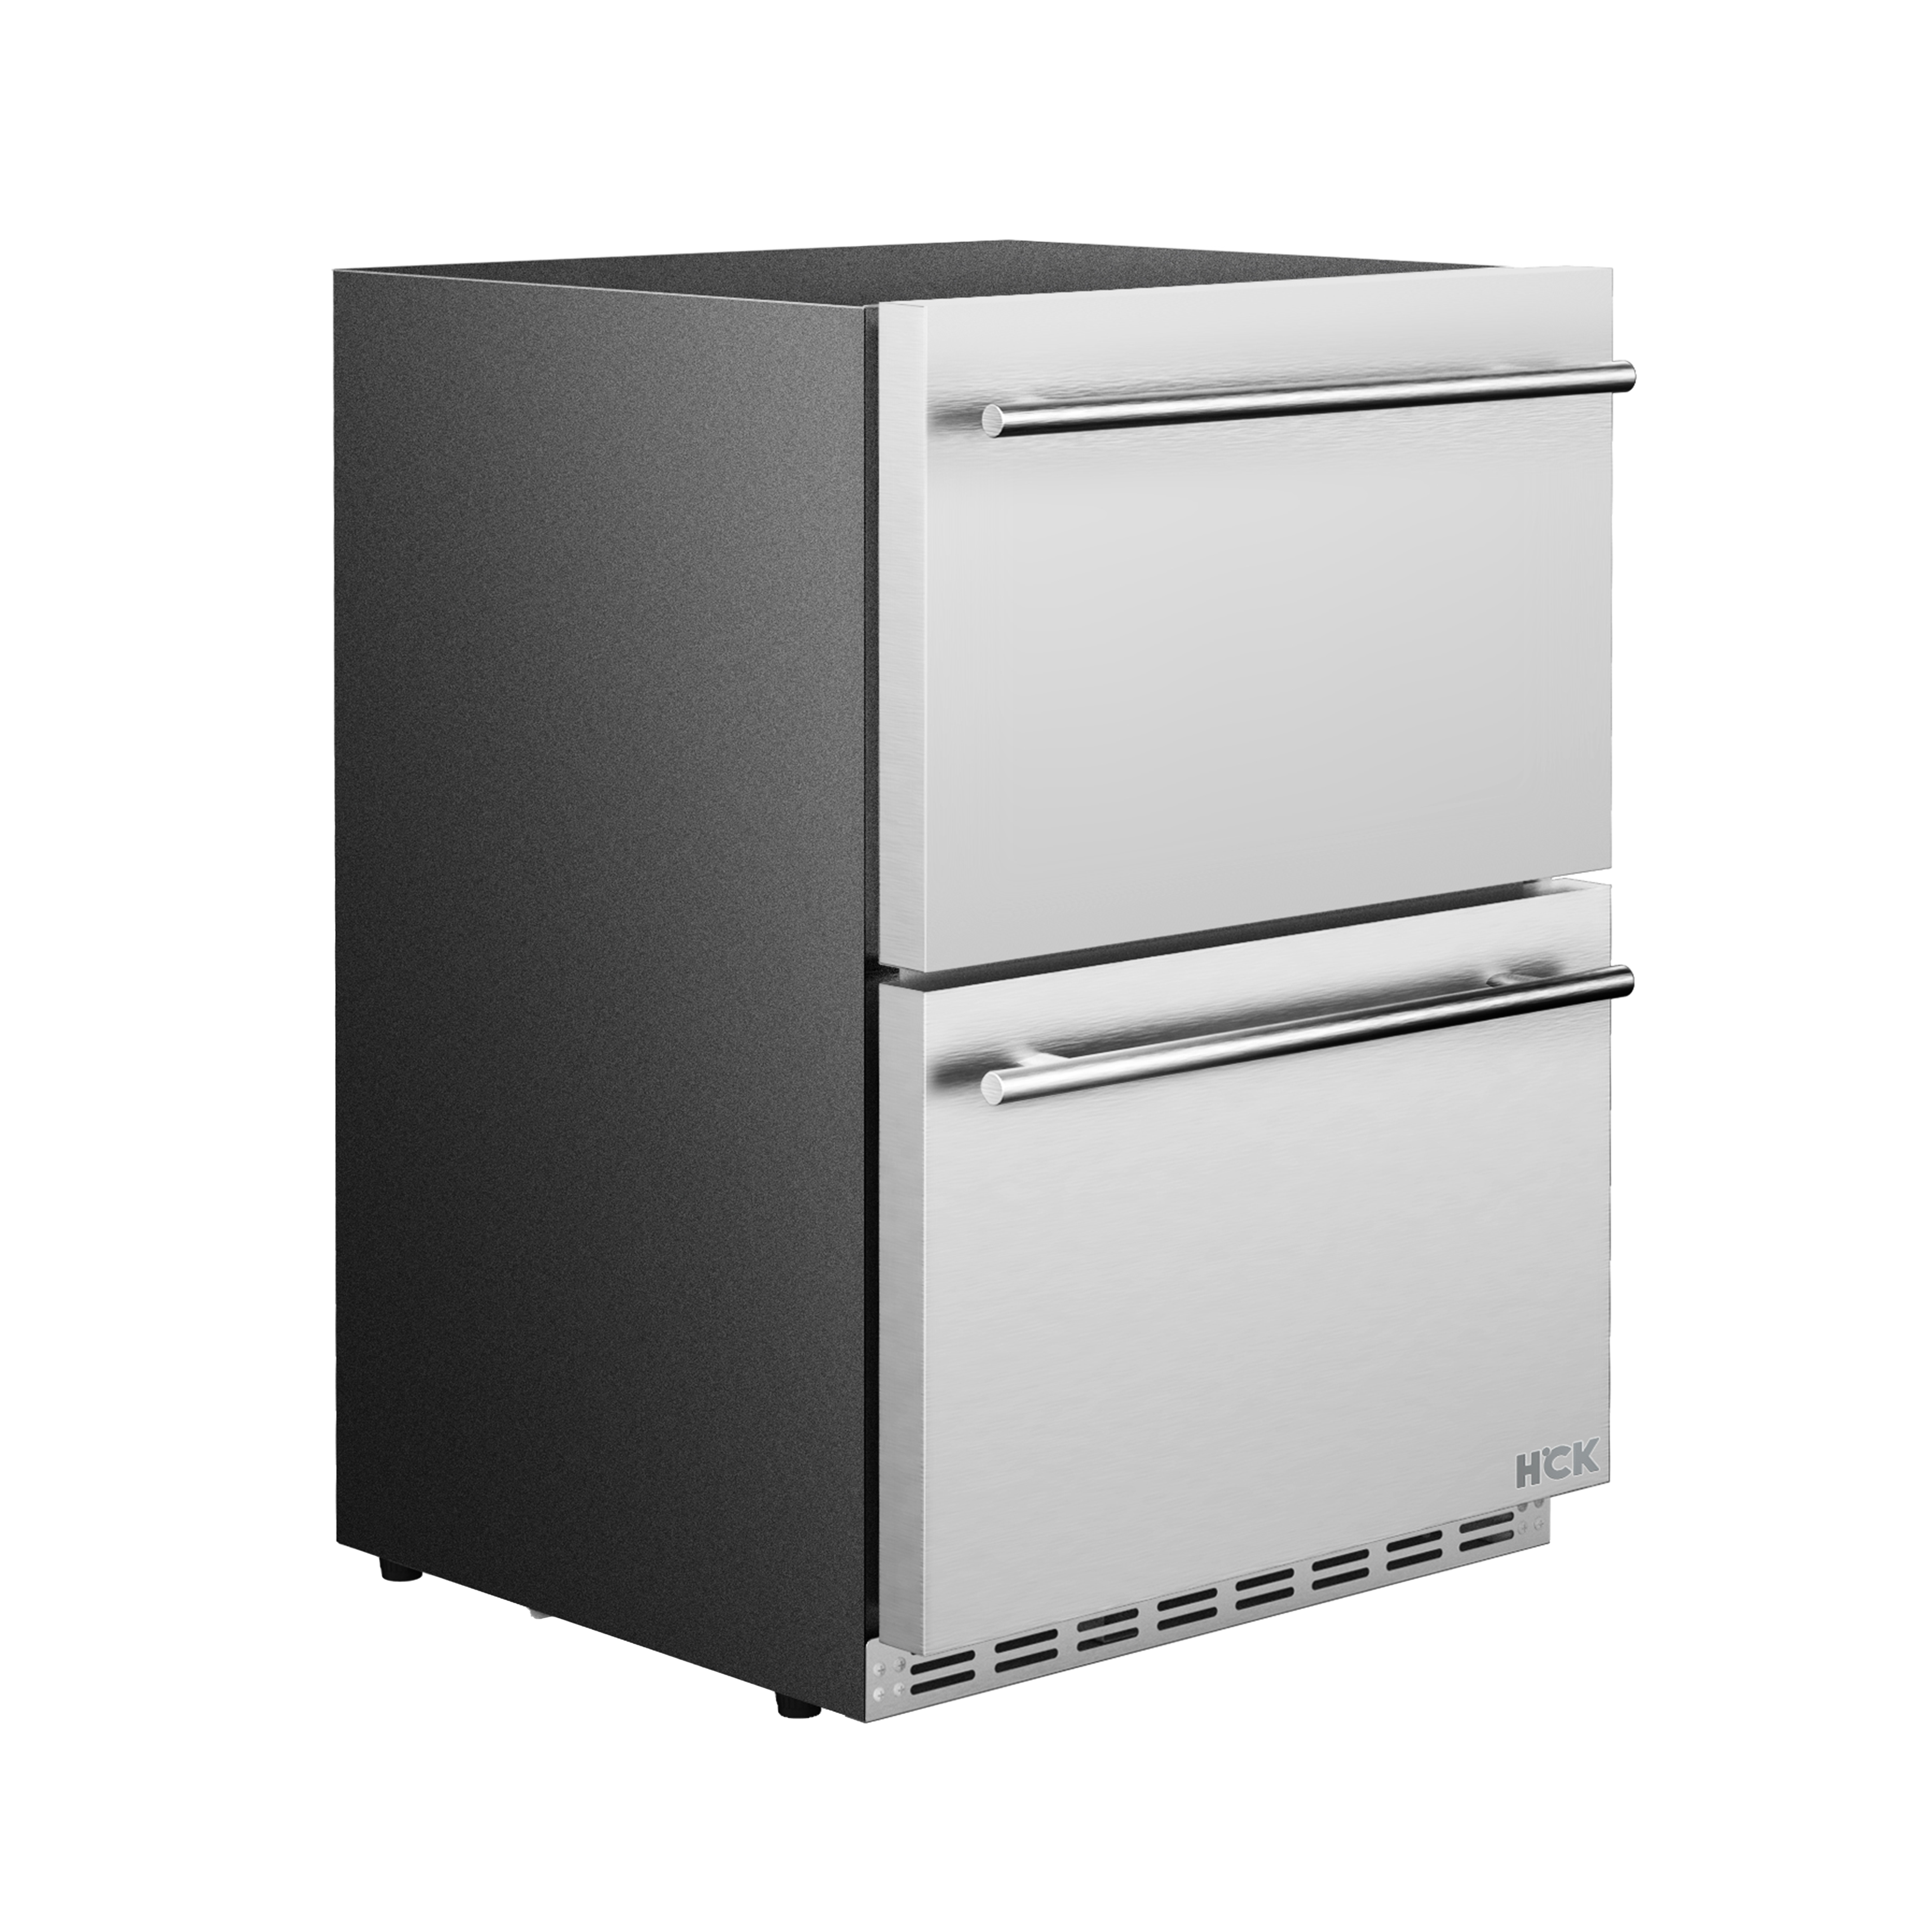 Side view of a Black 5.29 Cu Ft Stainless Steel Dual Zone Outdoor Refrigerator